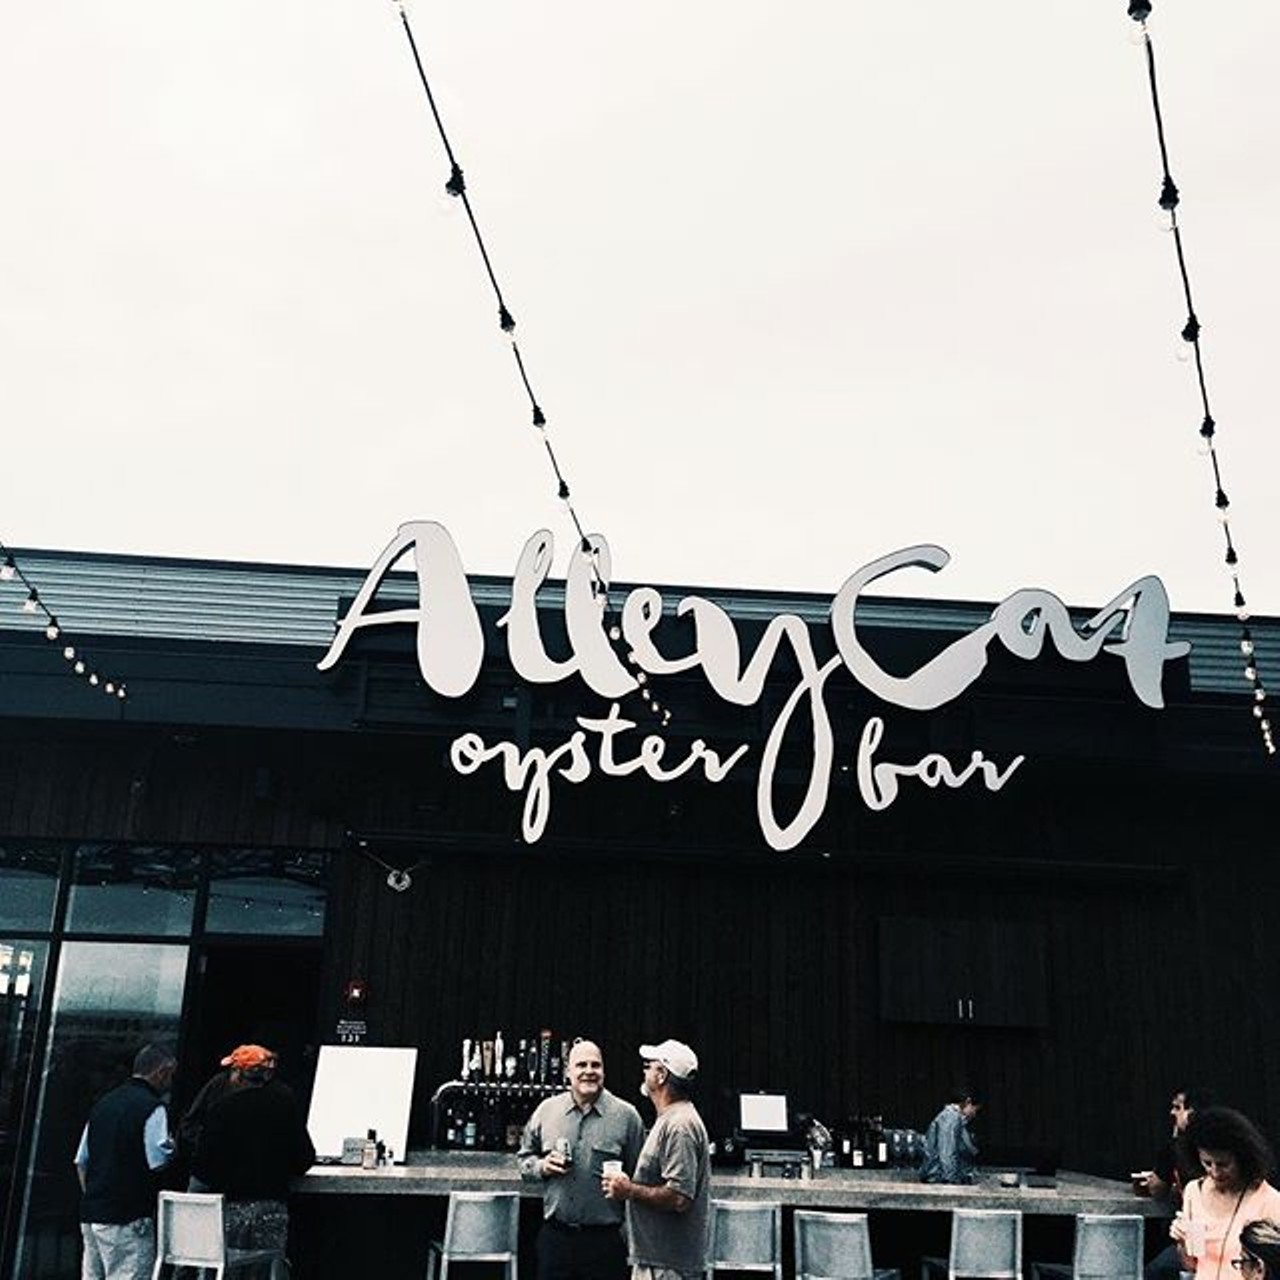 Alley Cat Oyster Bar
This oyster bar in the Flats is way more enjoyable when there isn't another head obstructing your view of the river. Alley Cat's seafood isn't to be missed, nor is its waterfront location. Go solo for a cheaper, less obstructed time. (Photo courtesy of Instagram user @anastasiasouris)